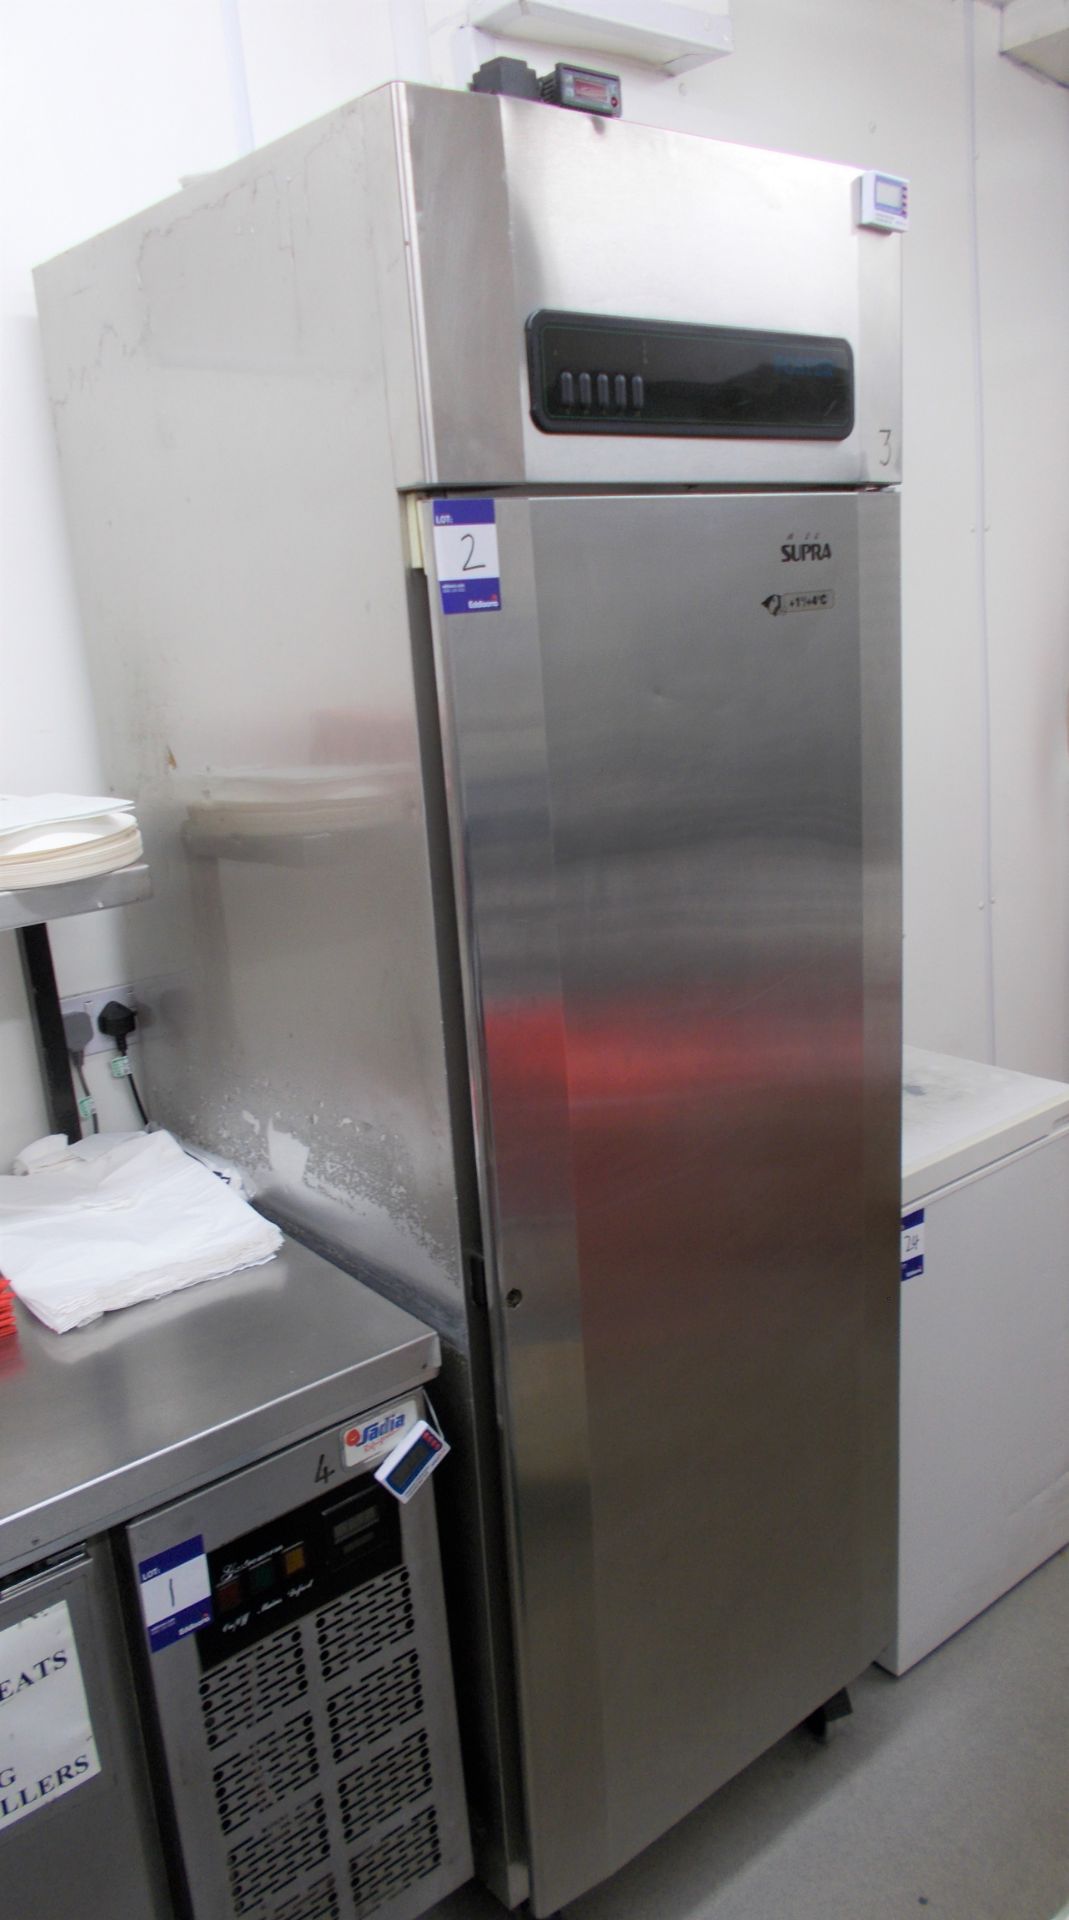 Foster Supra upright commercial refrigerator. Dimensions: H: 6ft 9 x D: 2ft 8 x W: 2ft 4